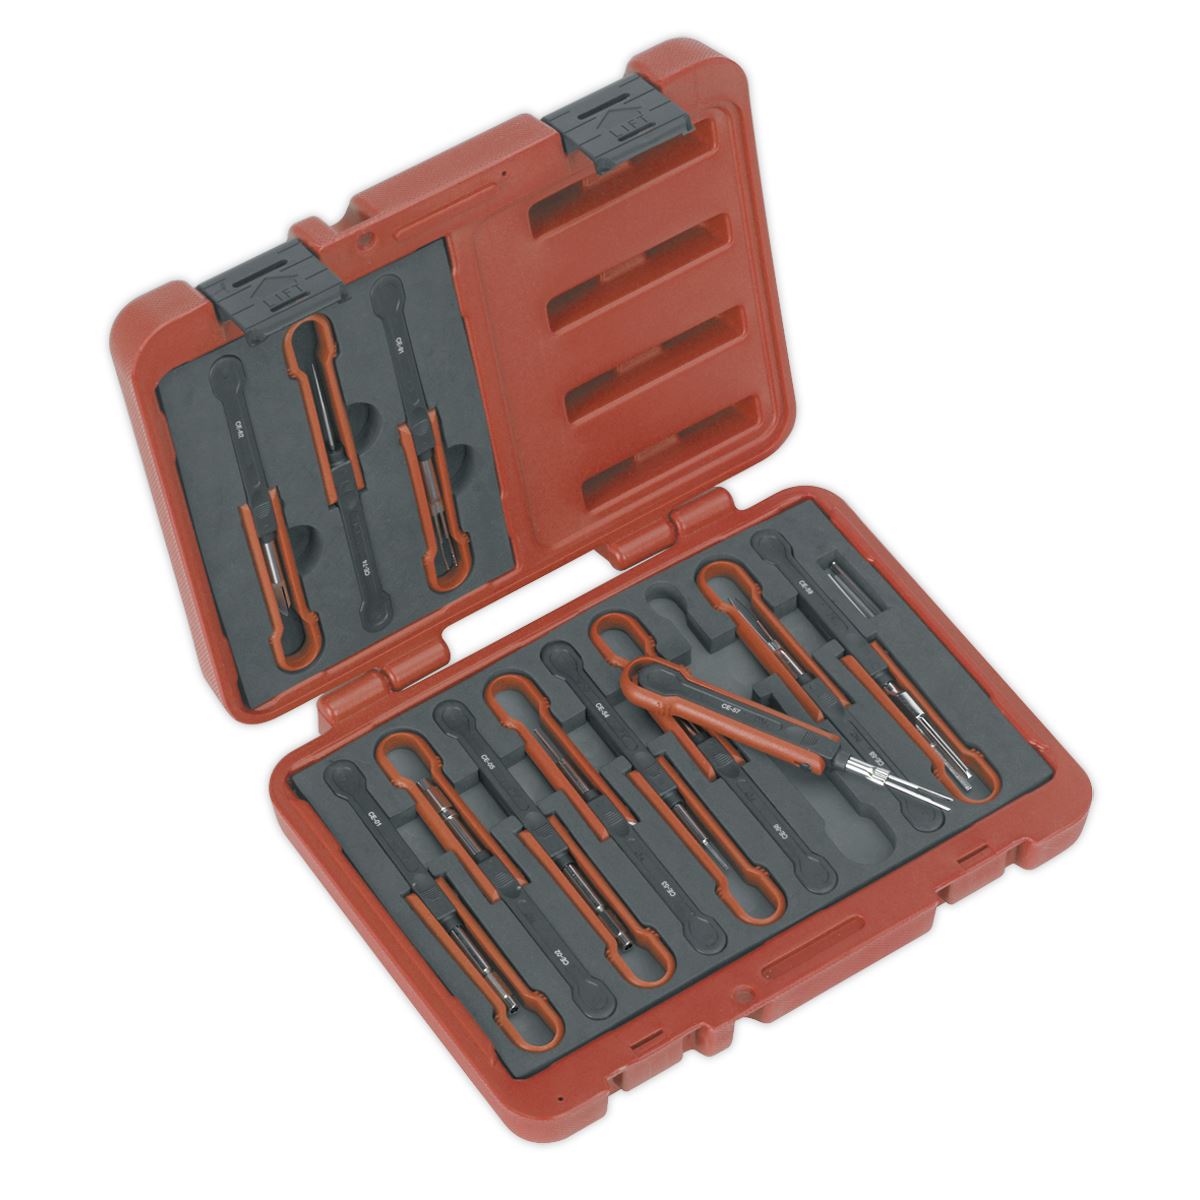 Sealey Universal Cable Ejection Tool Set 15pc